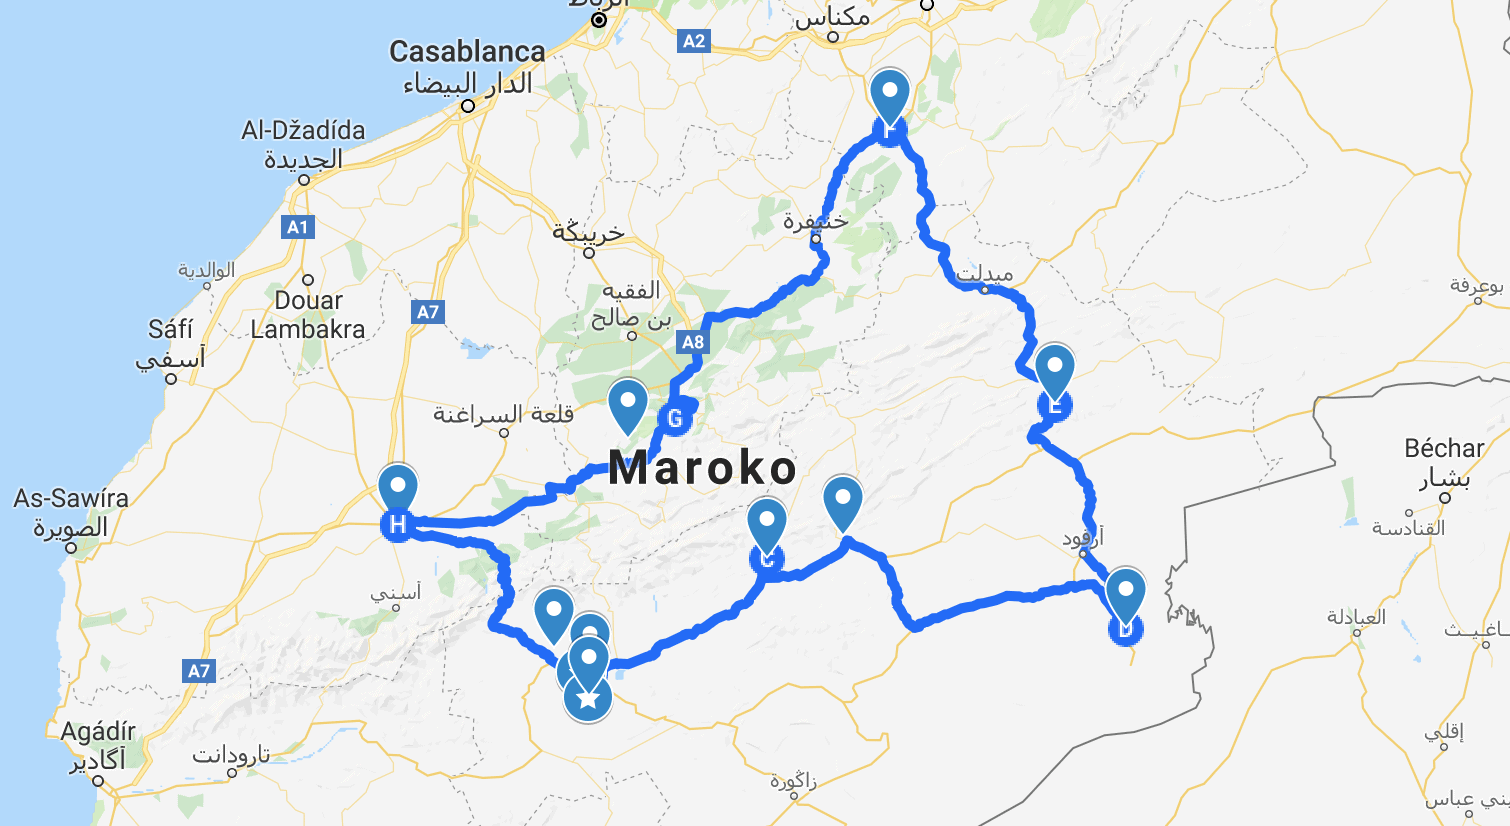 Roadtrip map of Morocco from Marrakesh to Sahara